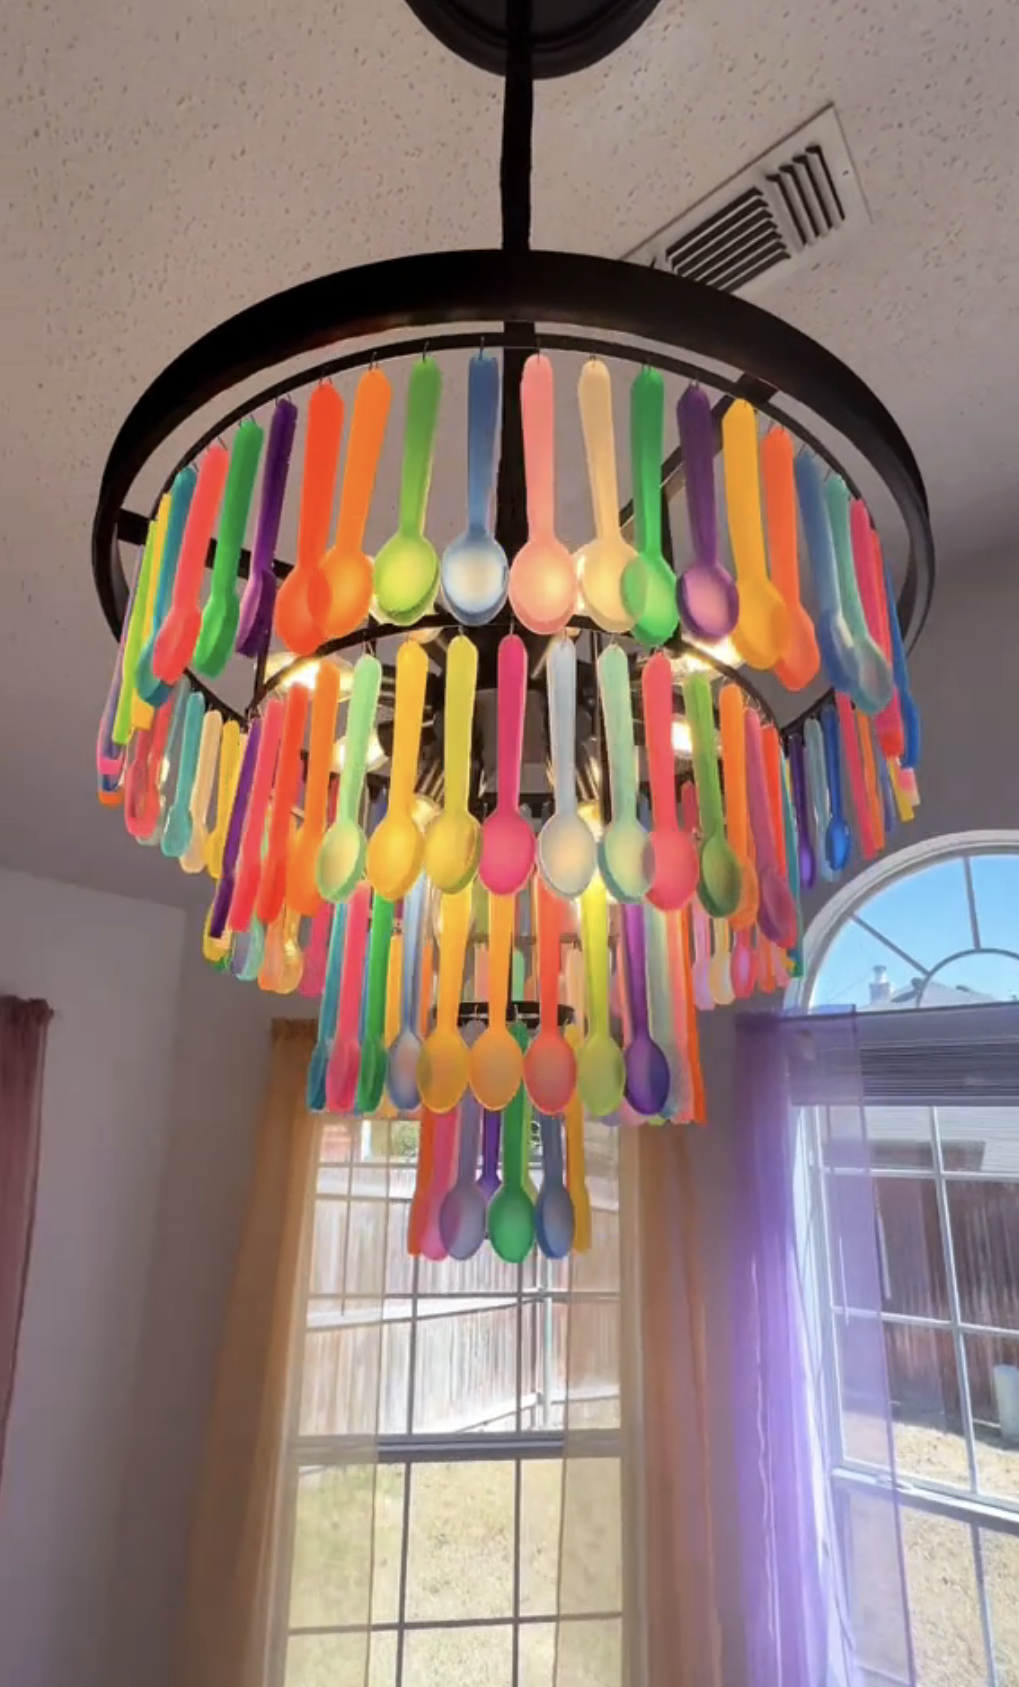 A closer shot of the chandelier made of colorful spoons hanging indoors, creating a unique decoration